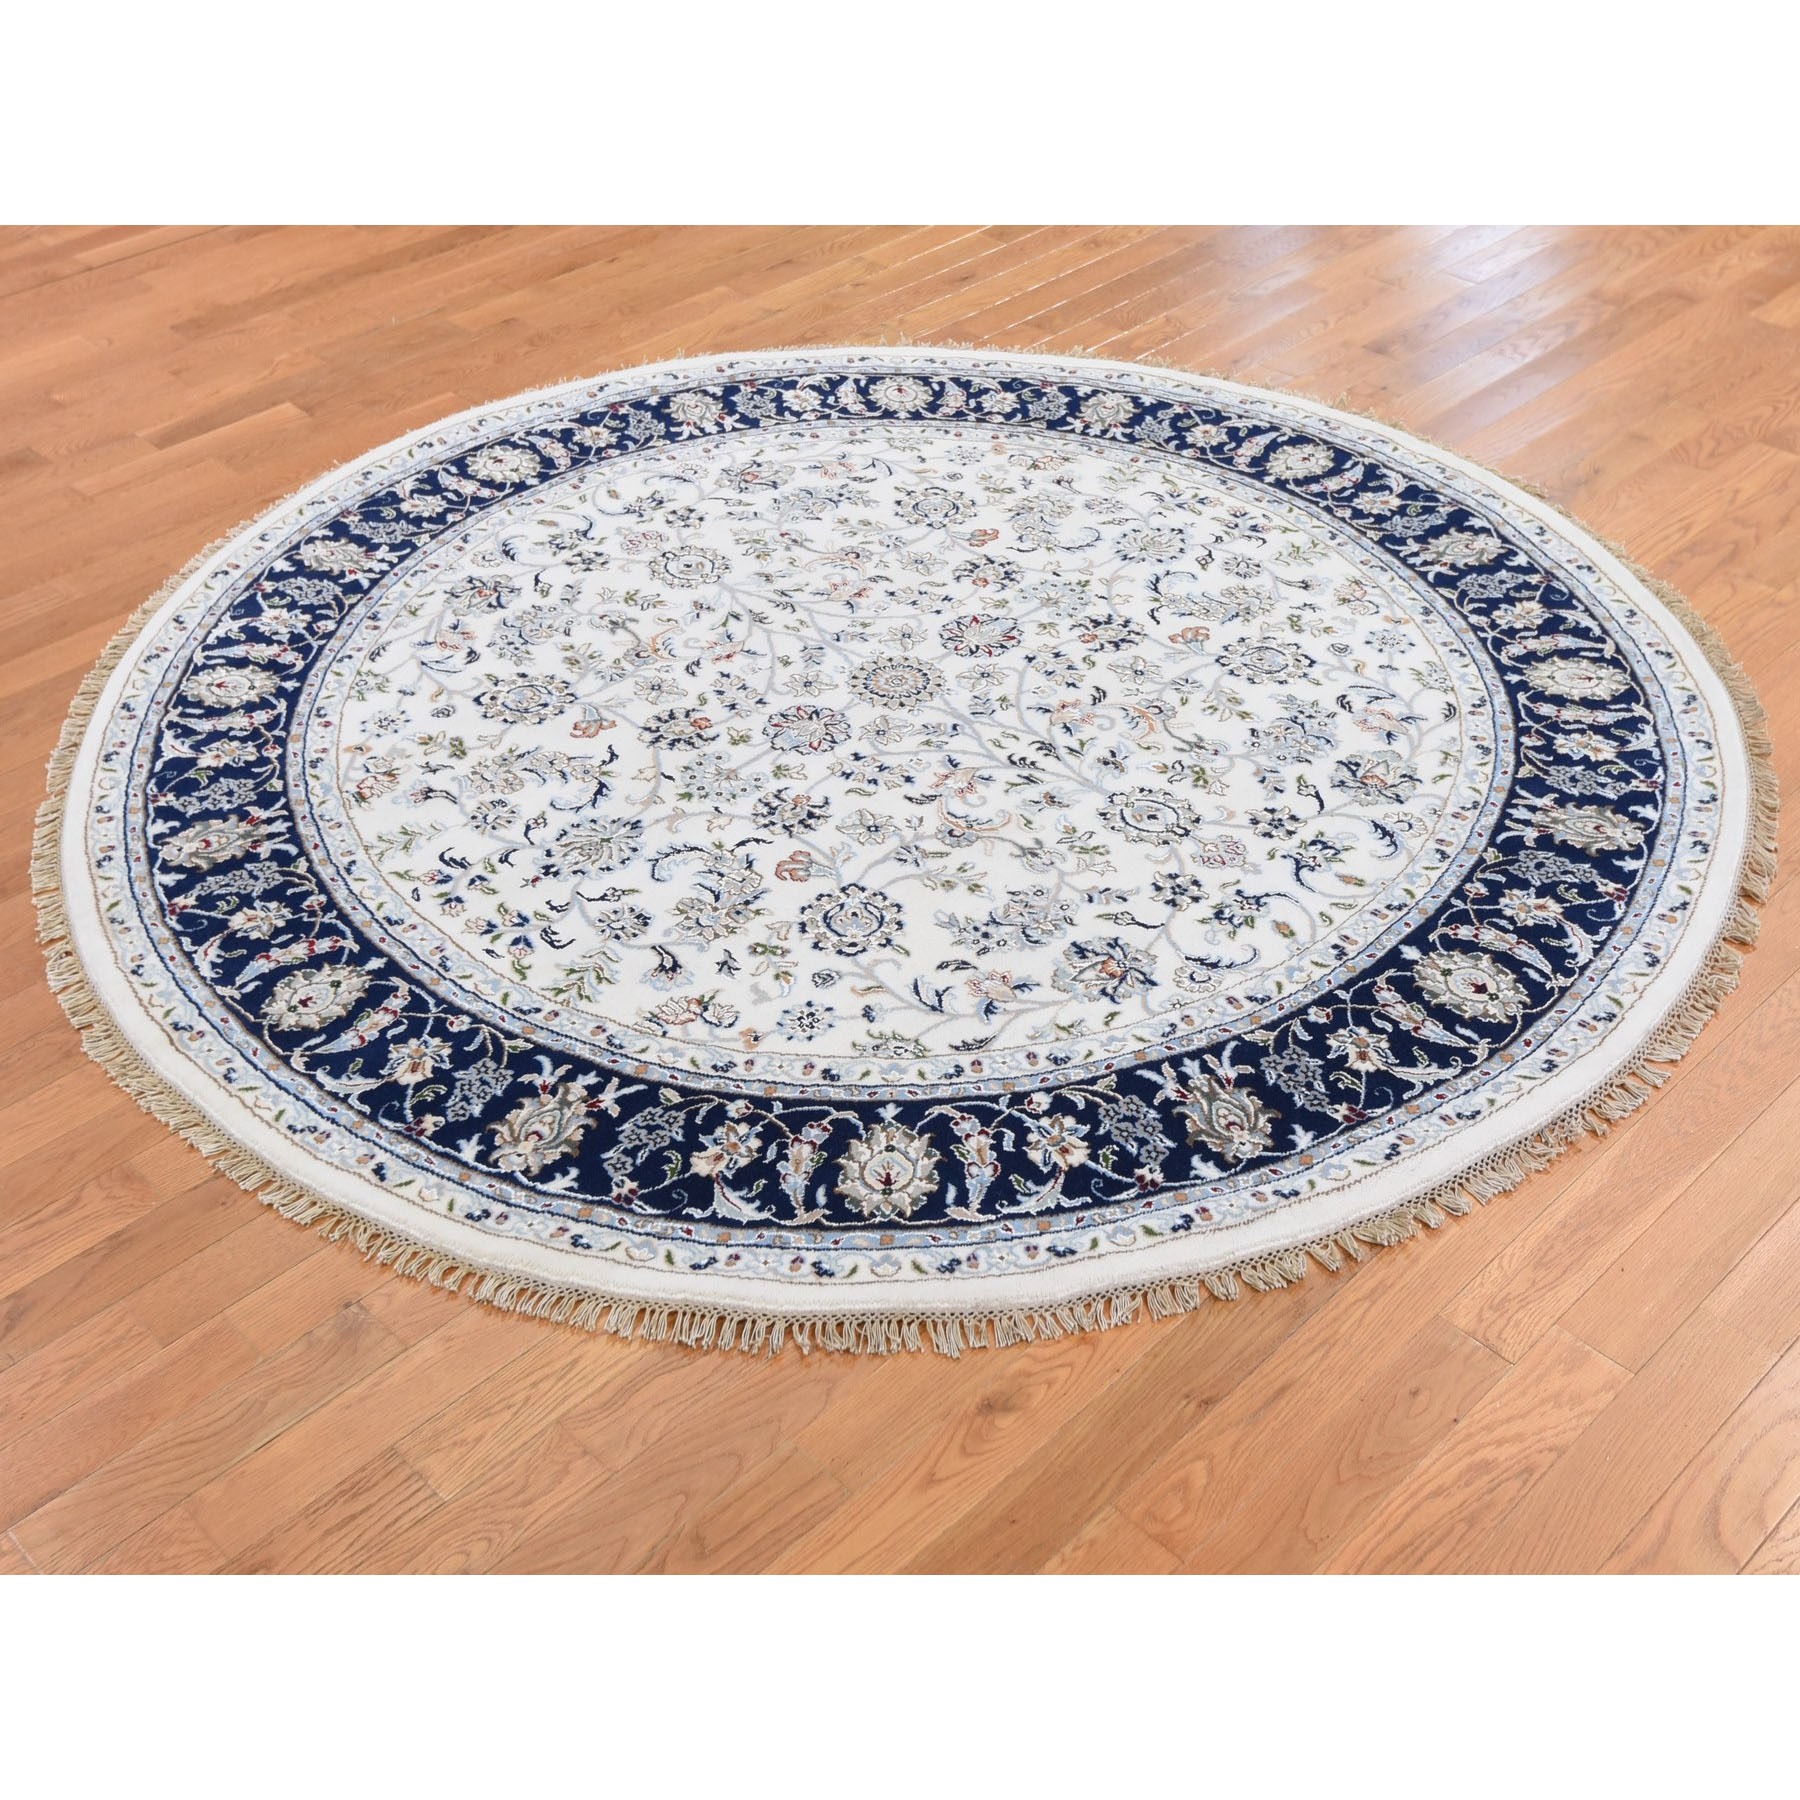 7-1 x7-1  Ivory Nain Wool And Silk 250 KPSI All Over Design Hand Knotted Round Oriental Rug 